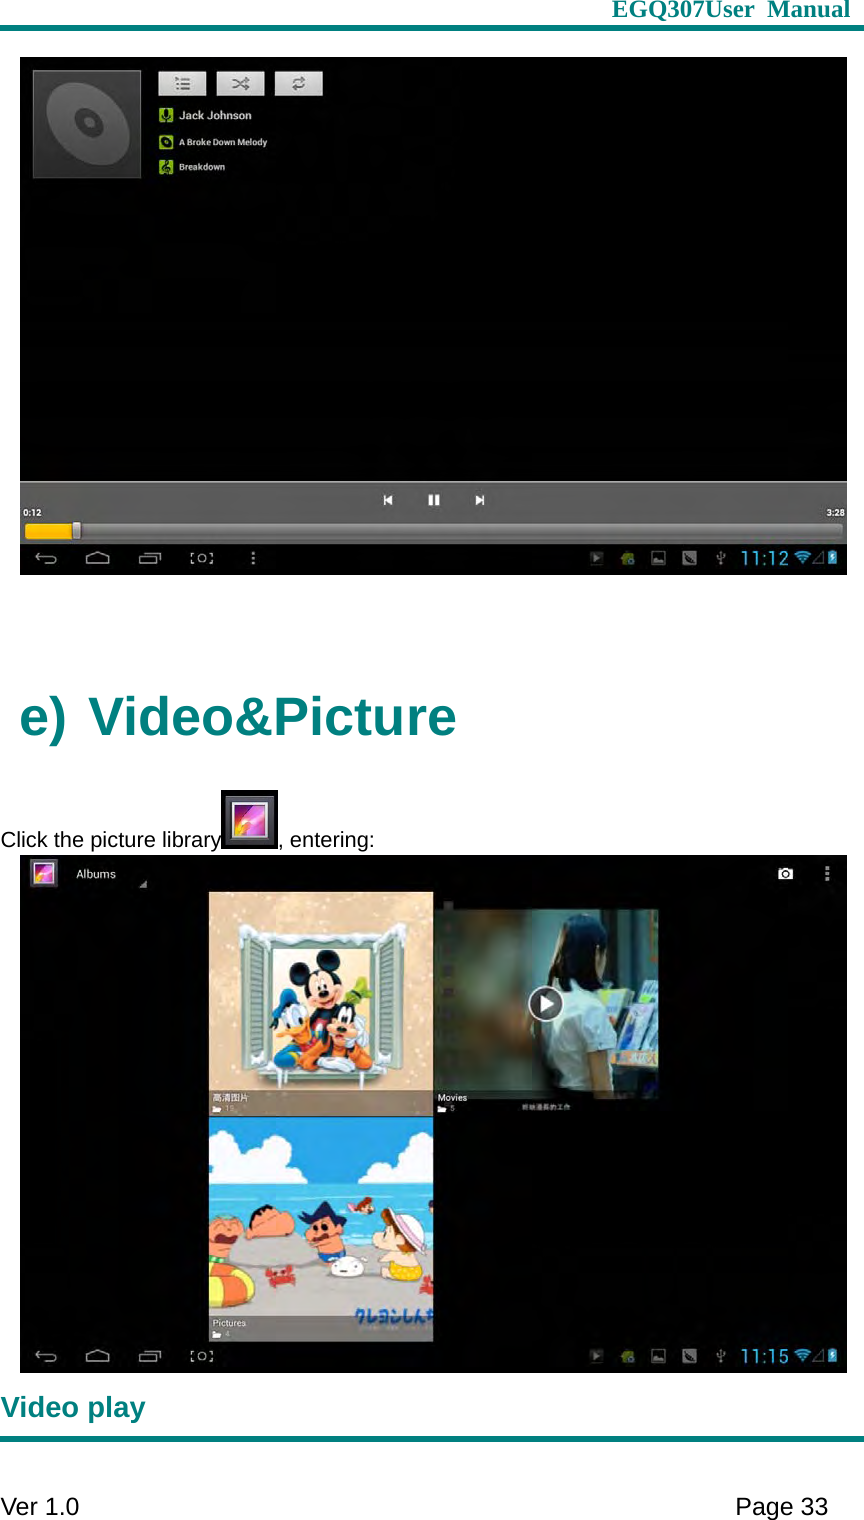                     EGQ307User Manual     Ver 1.0    Page 33     e) Video&amp;Picture Click the picture library , entering:  Video play 